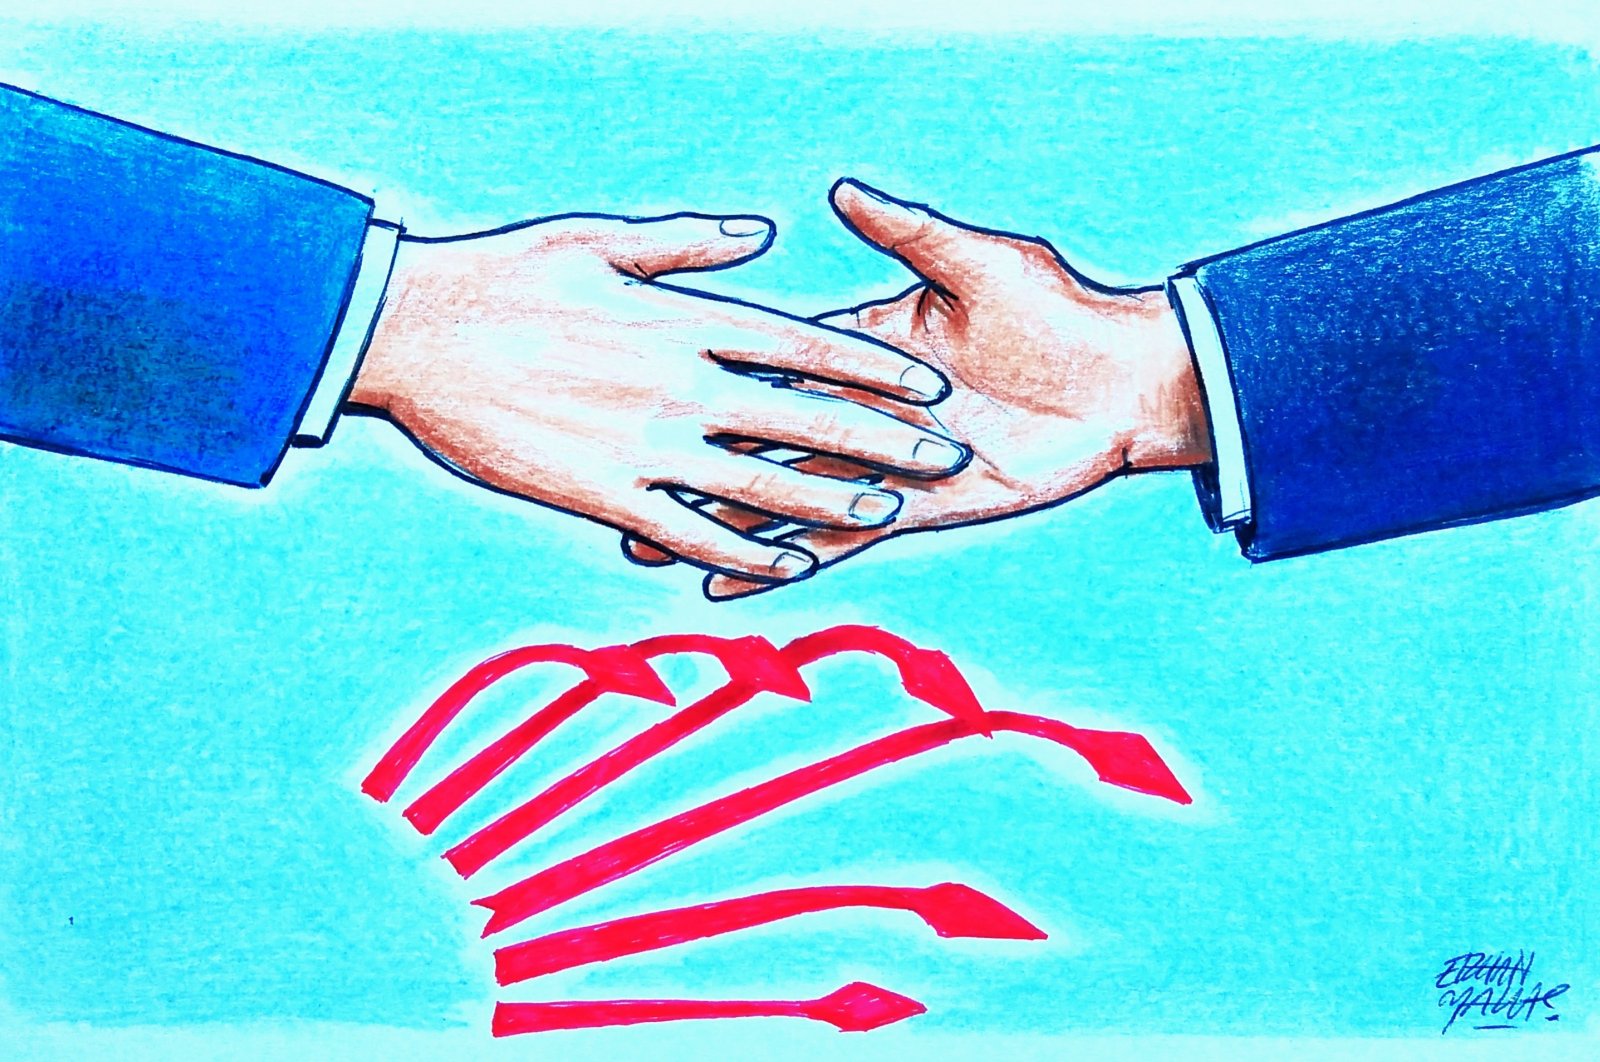 &quot;Although CHP&#039;s Özel highlighted the importance of shaking hands and noted that he discussed “everything” with President Erdoğan, some of his party’s senior officials and parliamentarians have marched to the Ministry of Education and described the new education model as &#039;obsolete.&#039;&quot; (Illustration by Erhan Yalvaç)